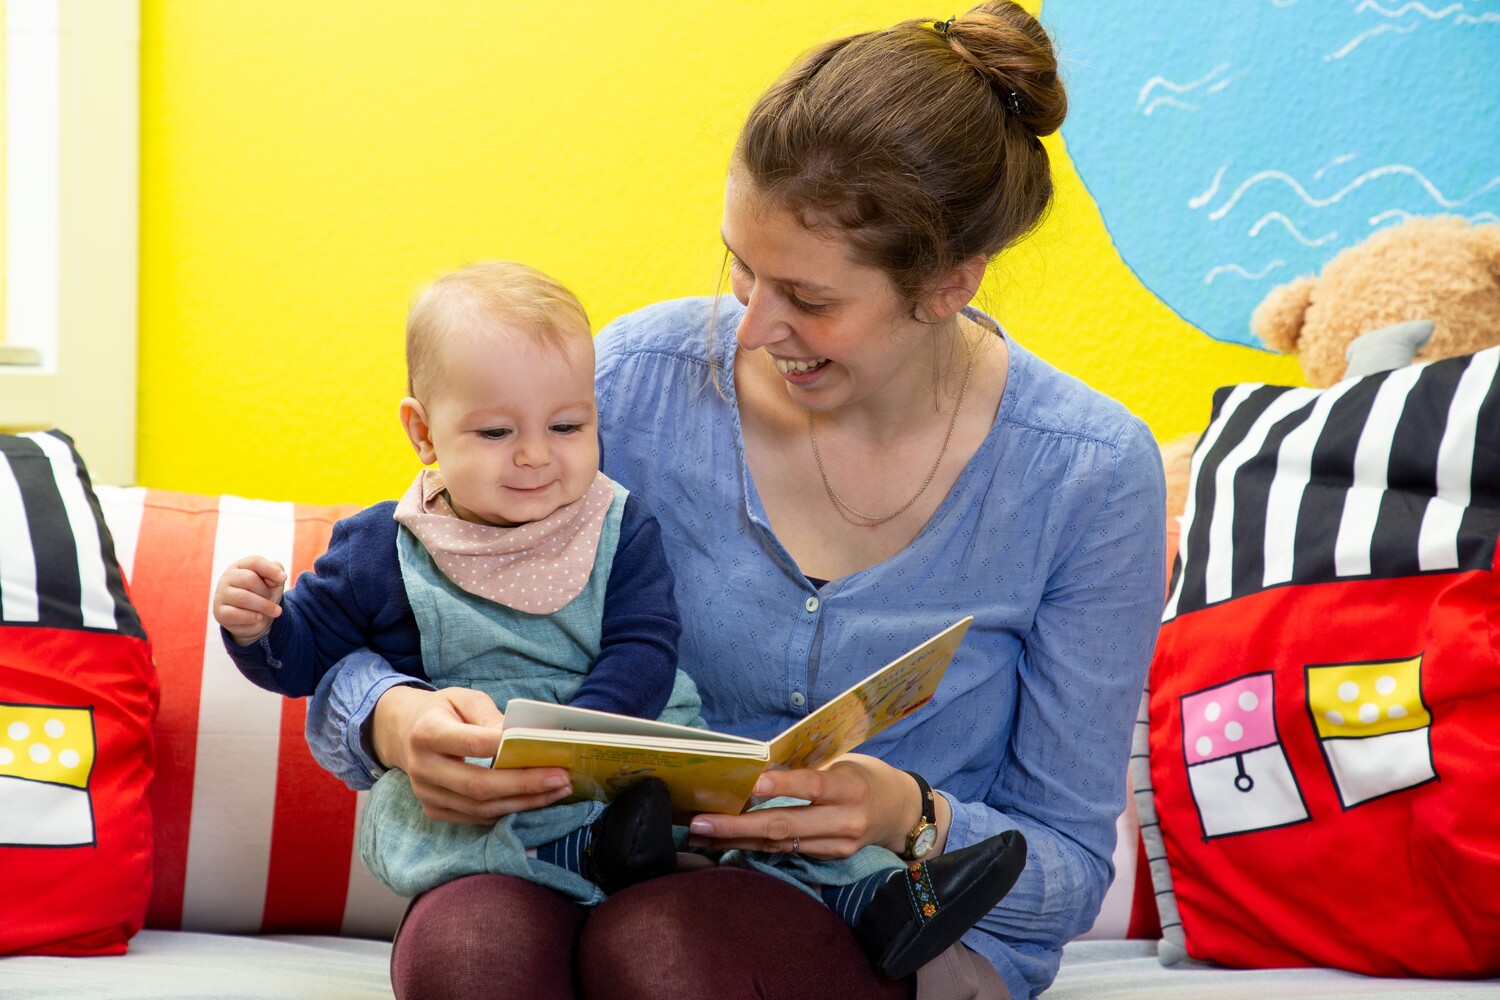 Mother and child engaged in reading a book together.